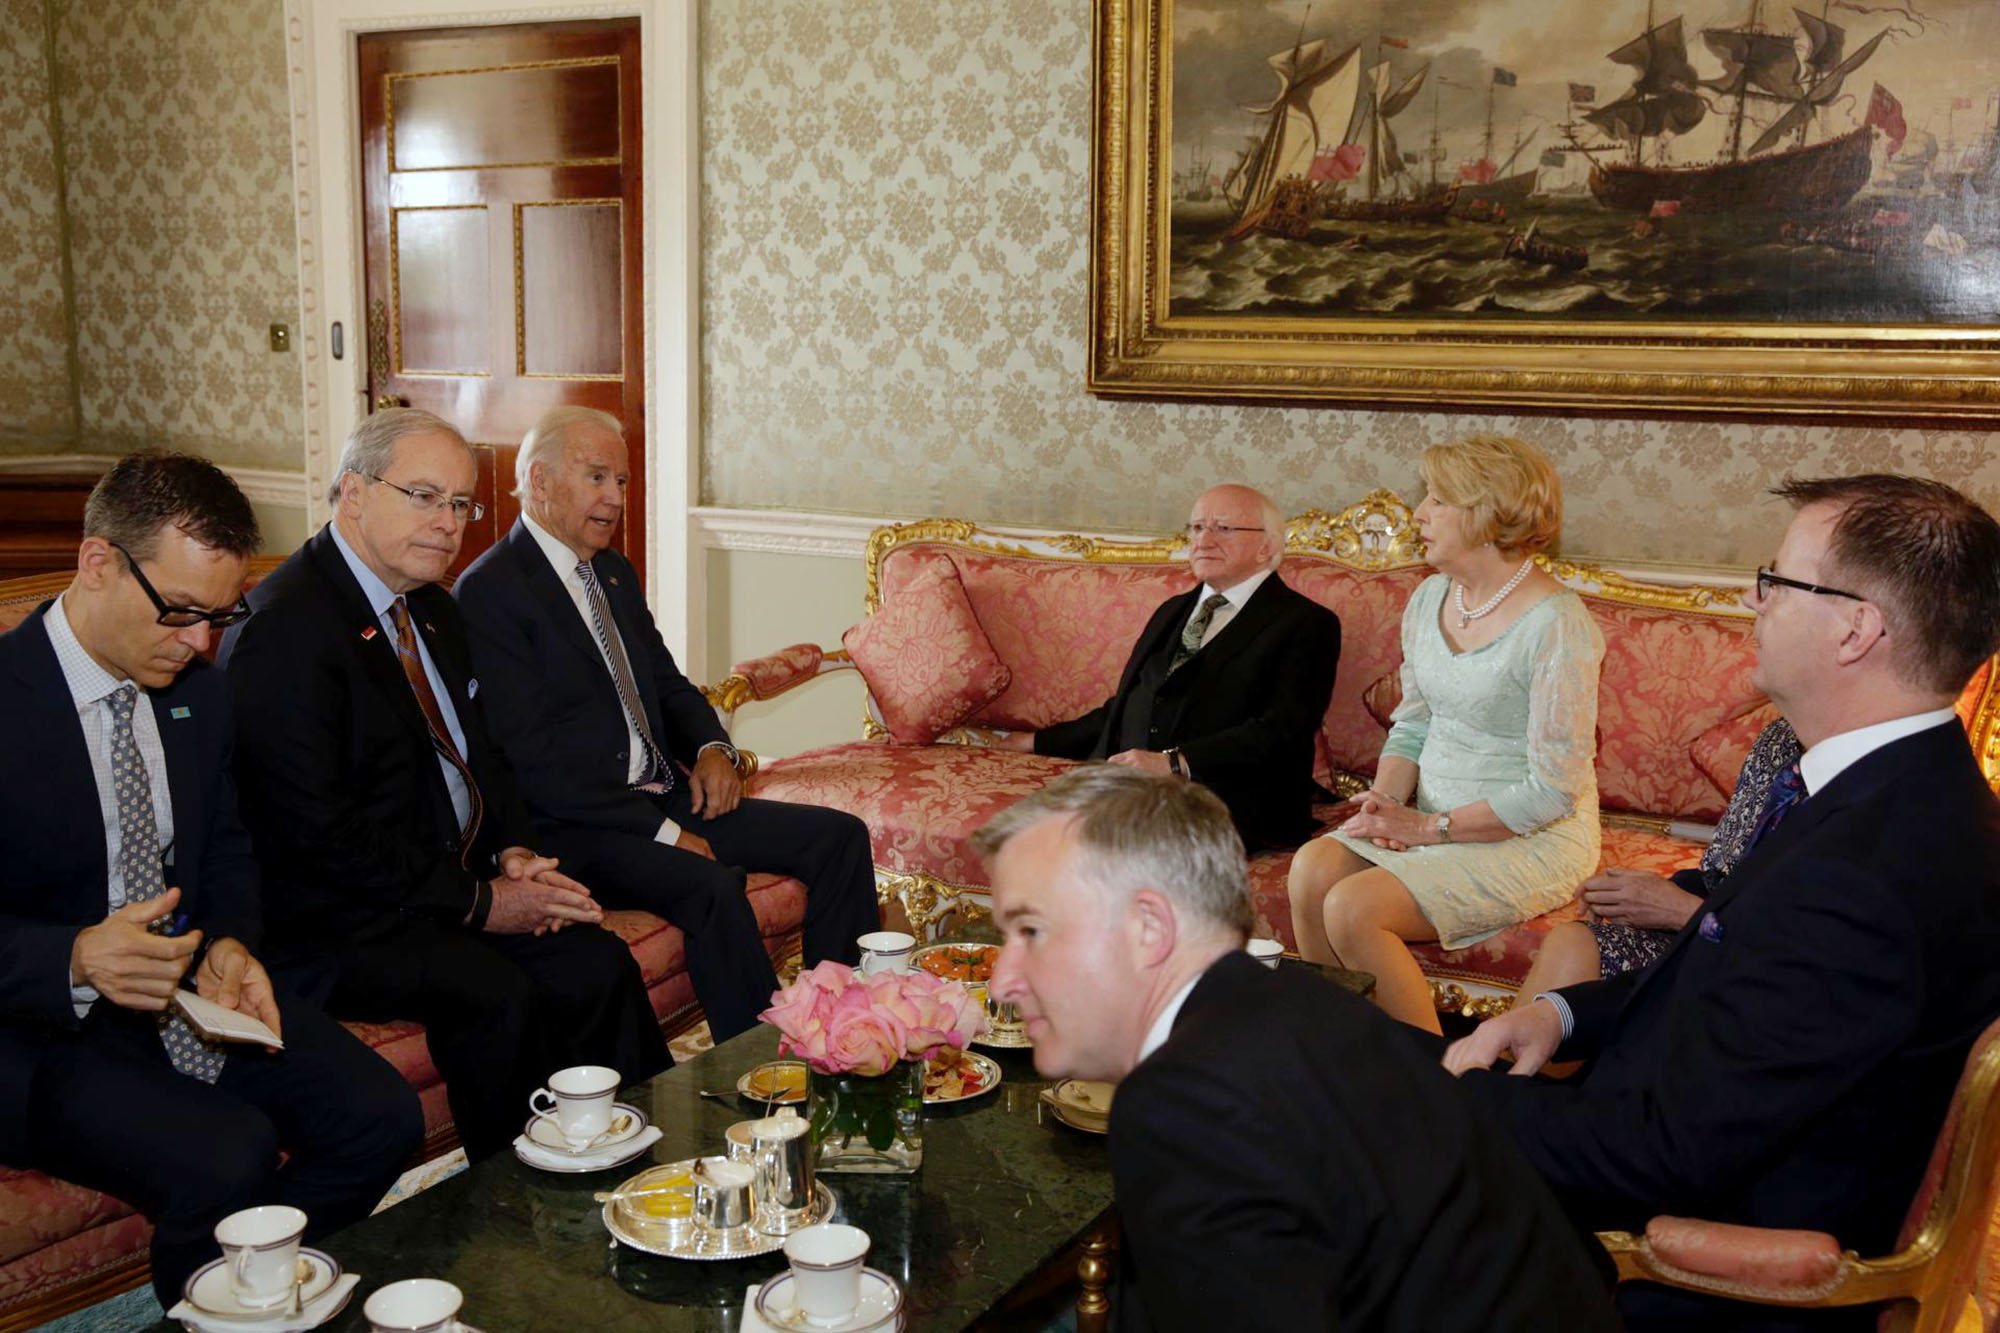 Vice President Joe Biden attends a bilateral meeting with President Michael Higgins at the President's Residence in Dublin, Ireland, June 22, 2016. Also in attendance are U.S. Amb. to Ireland Kevin O'Malley, Colin Kahl, Mrs. Sabina Higgins, Ireland Amb. to the U.S. Anne Anderson; Art O’Leary, Secretary General to the President; Liam Herrick, Adviser to the President. (Official White House Photo by David Lienemann)